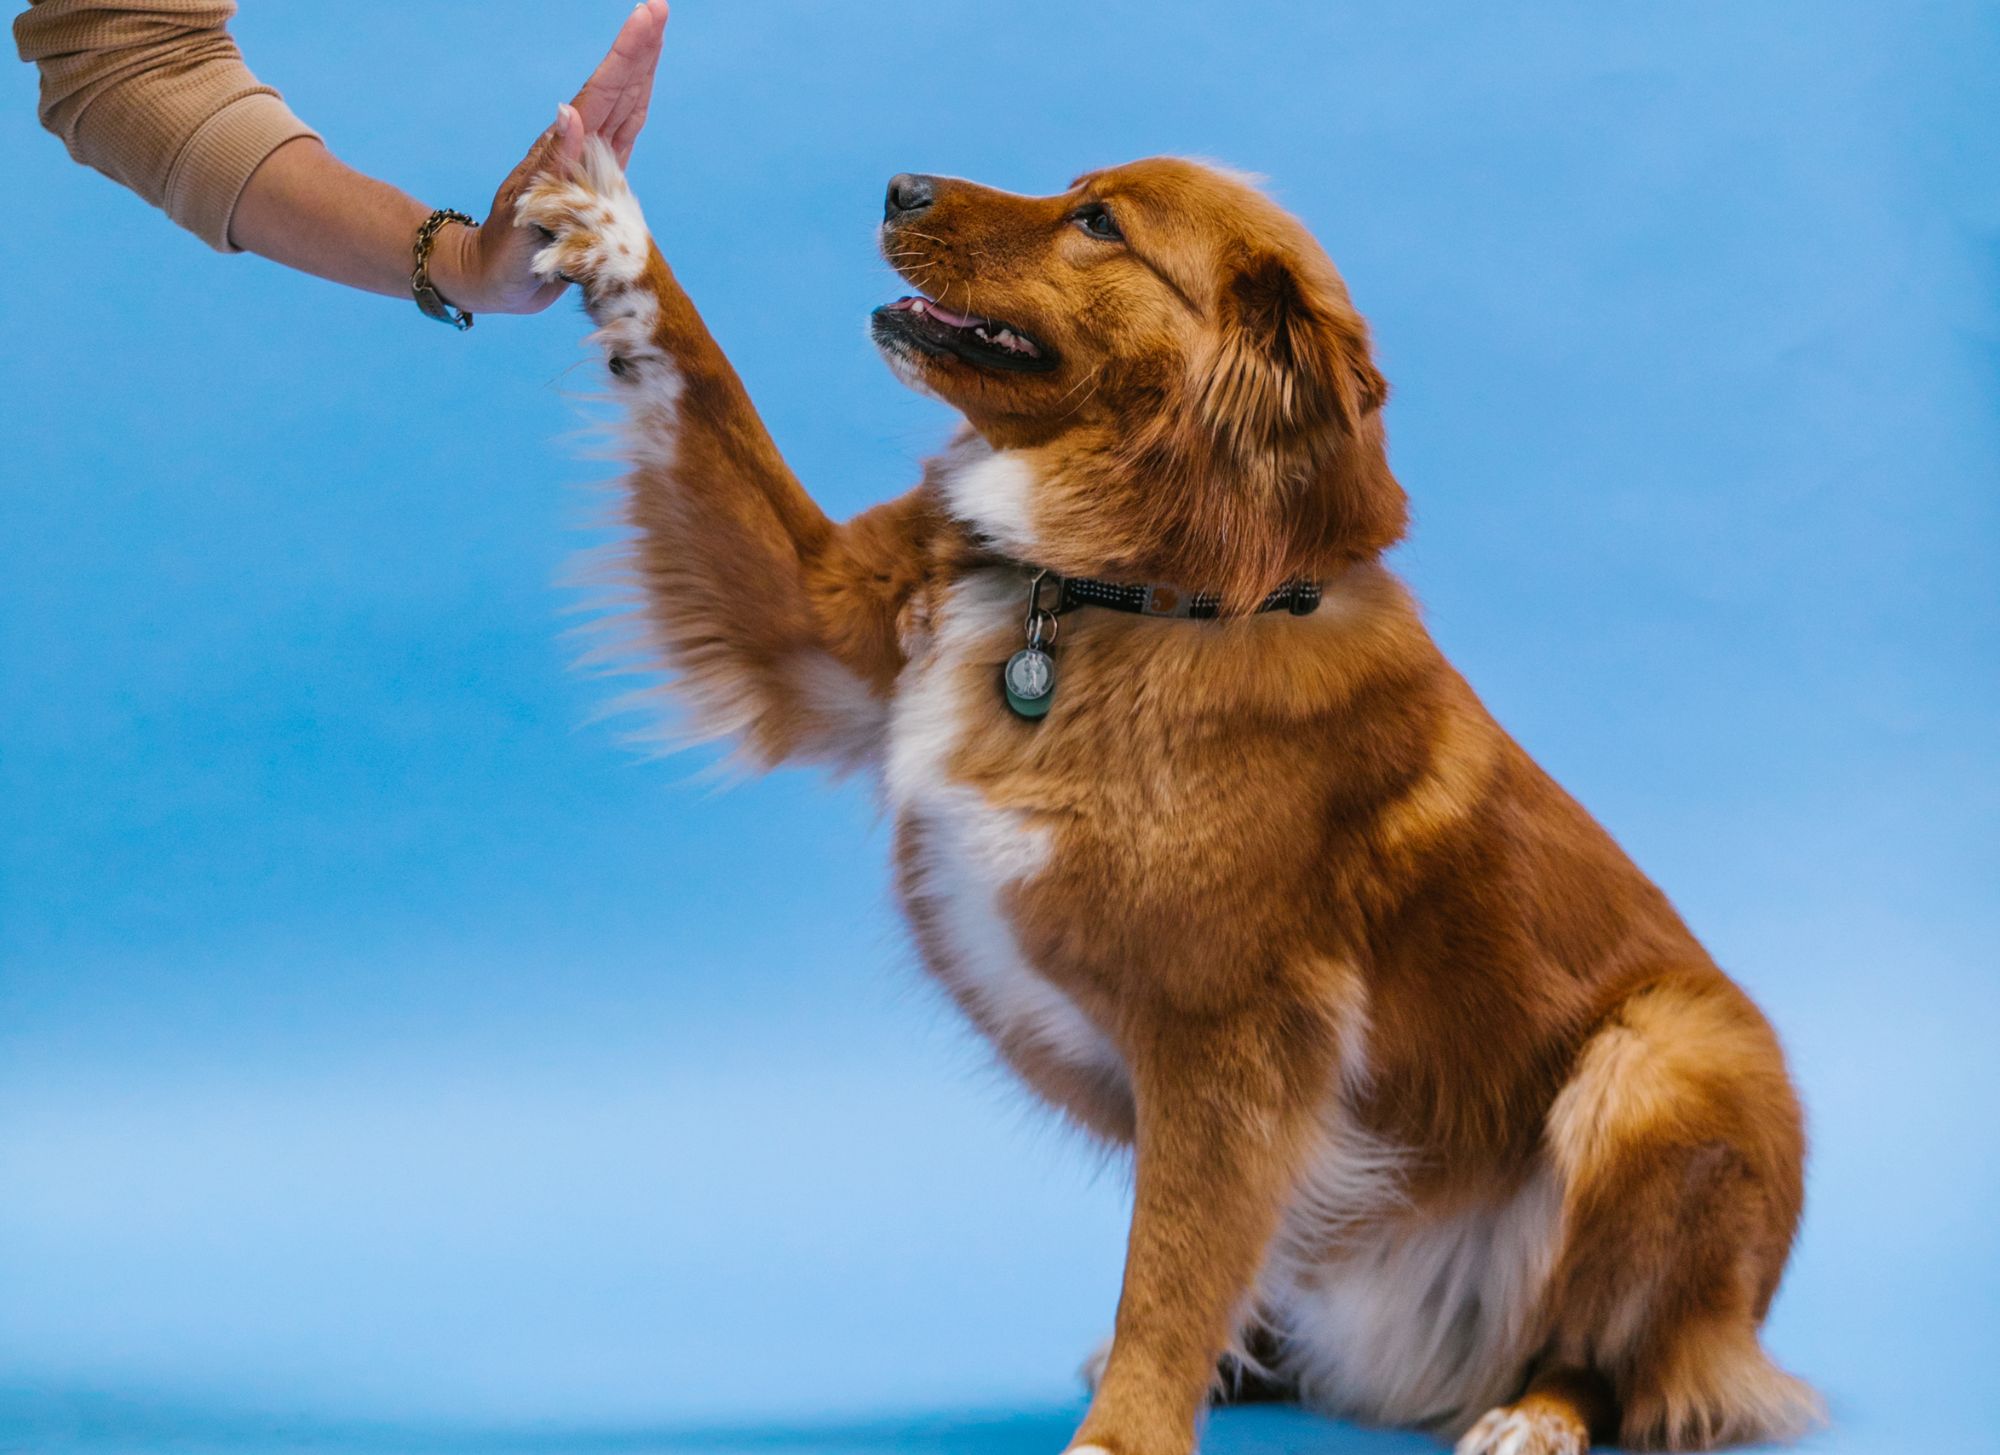 A person high fives a red and white fluffy dog.